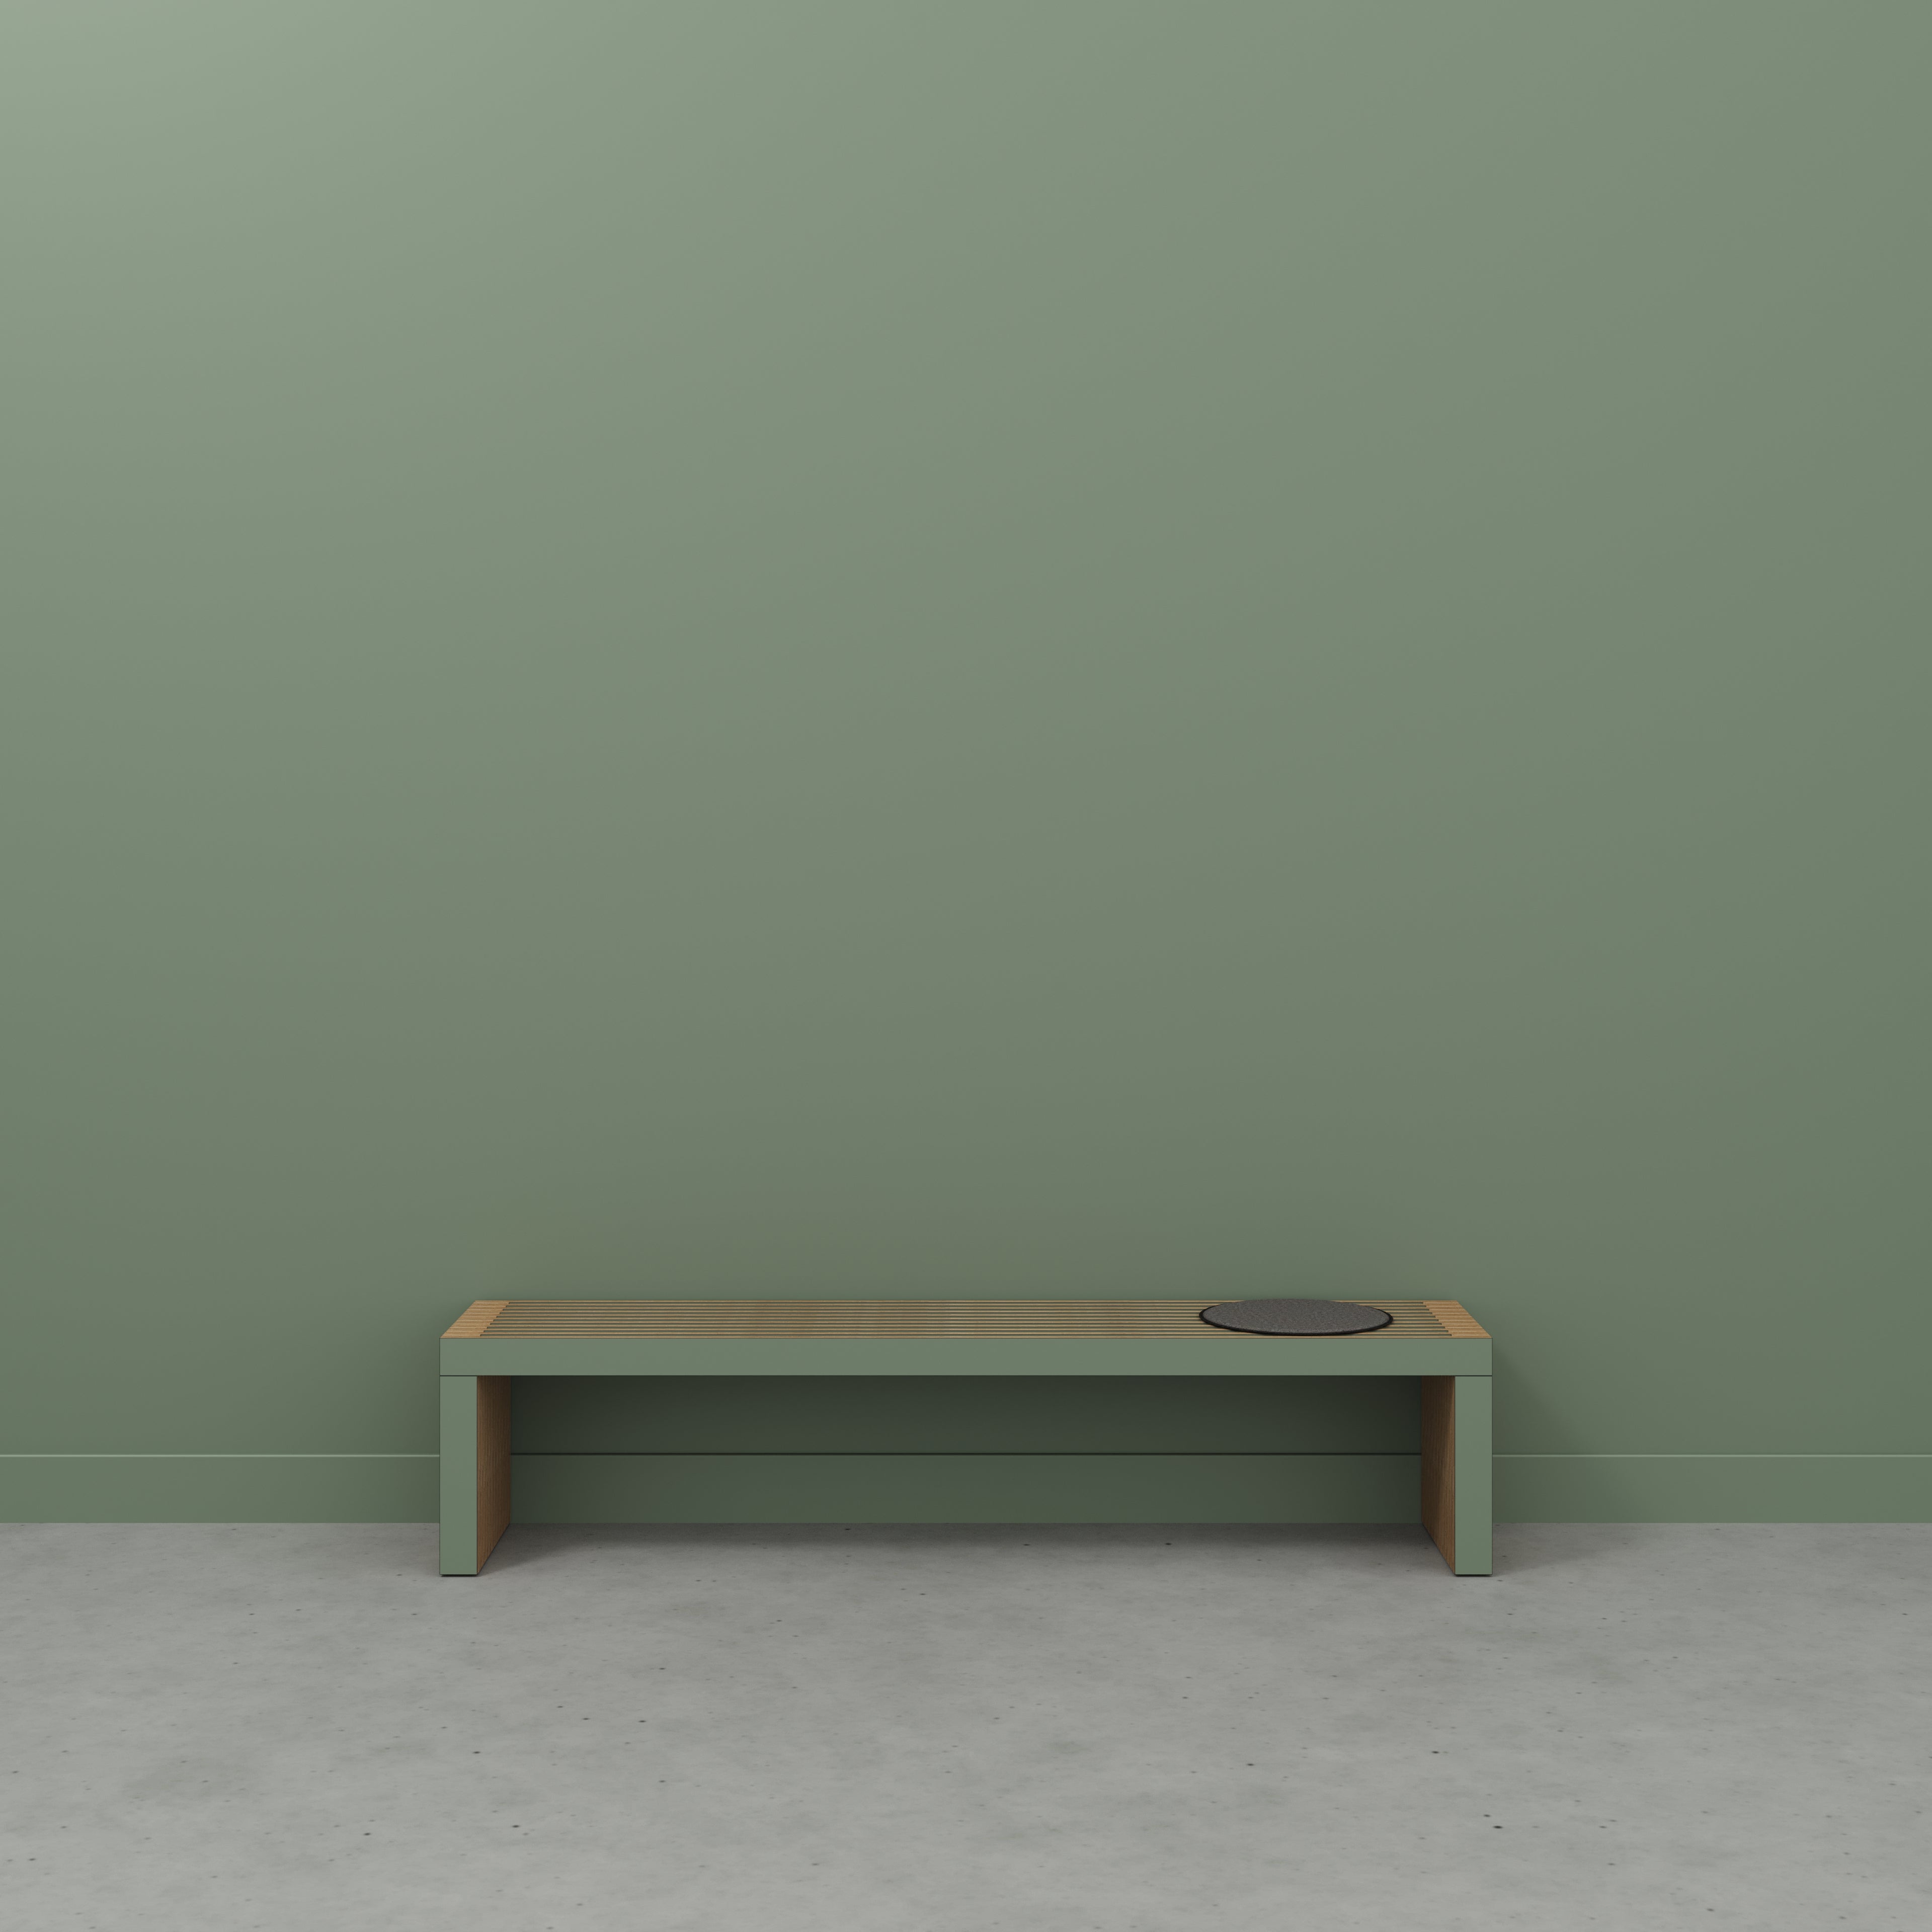 Bench Seat with Slats - Formica Green Slate - 2000(w) x 410(d) x 450(h)